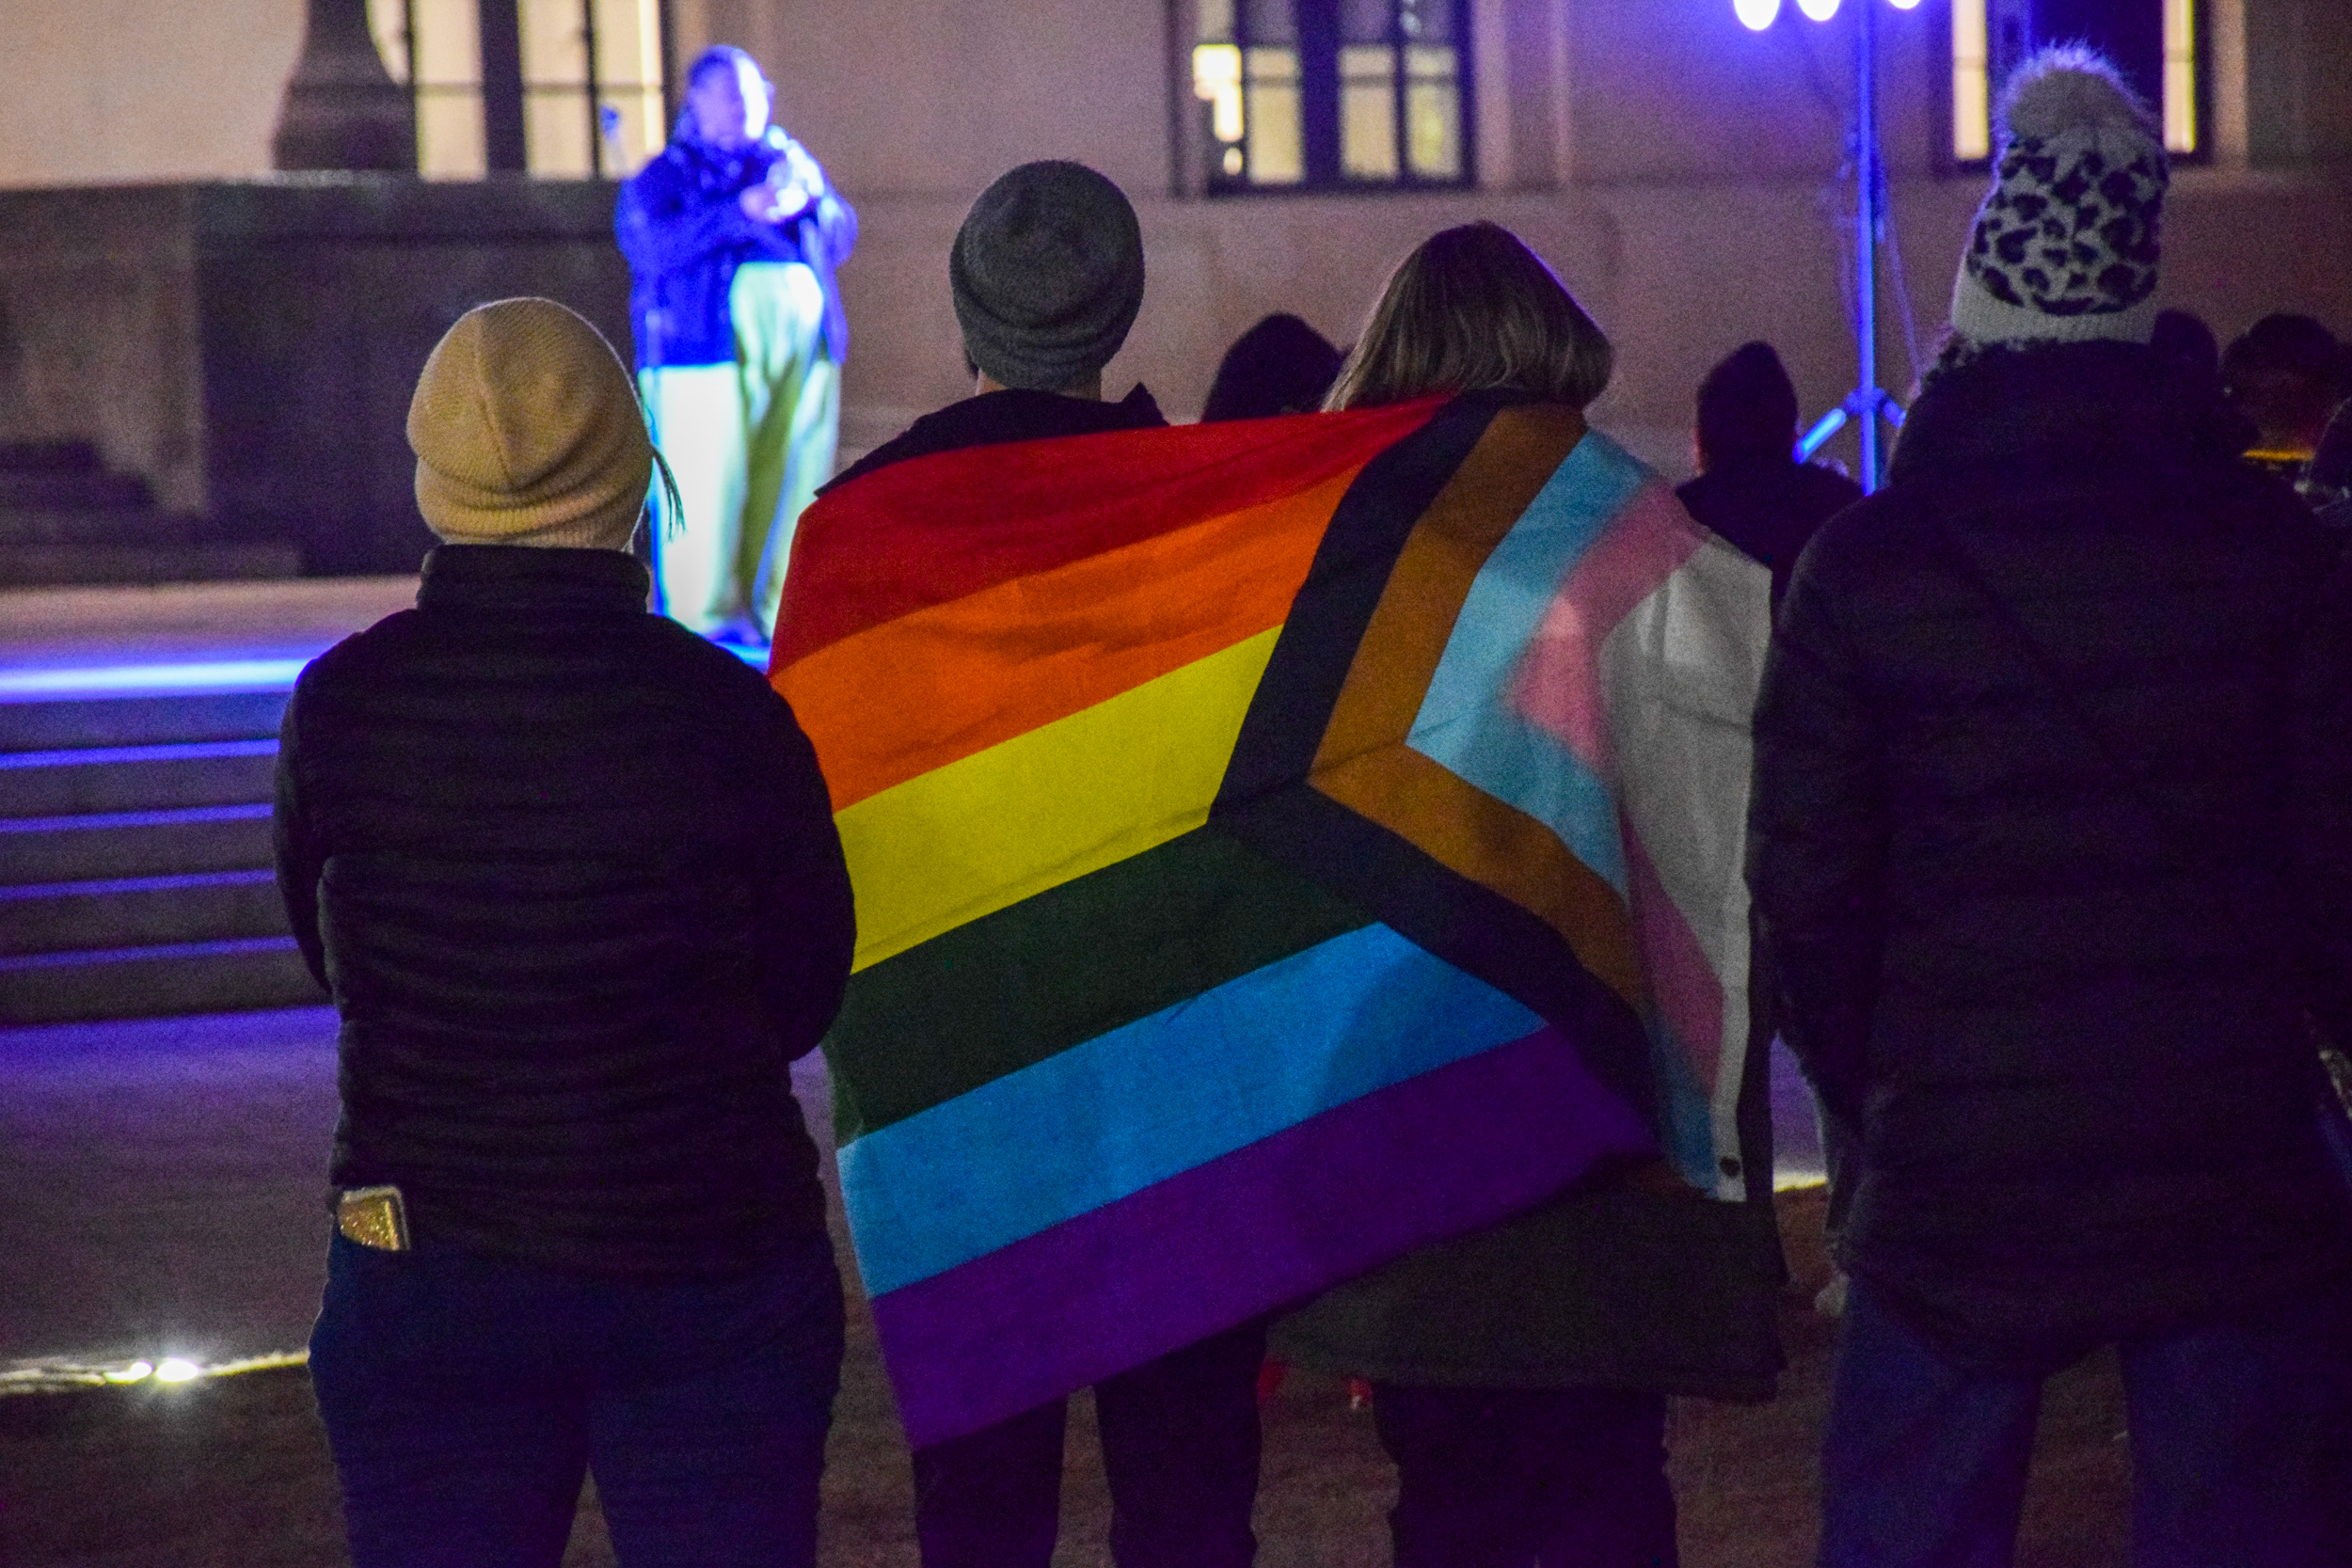 Two people wrapped in a pride flag attend a vigil Nashville for the victims of a mass shooting at an LGBT+ nightclub in Colorado Springs, Colorado on Nov. 19, 2022.